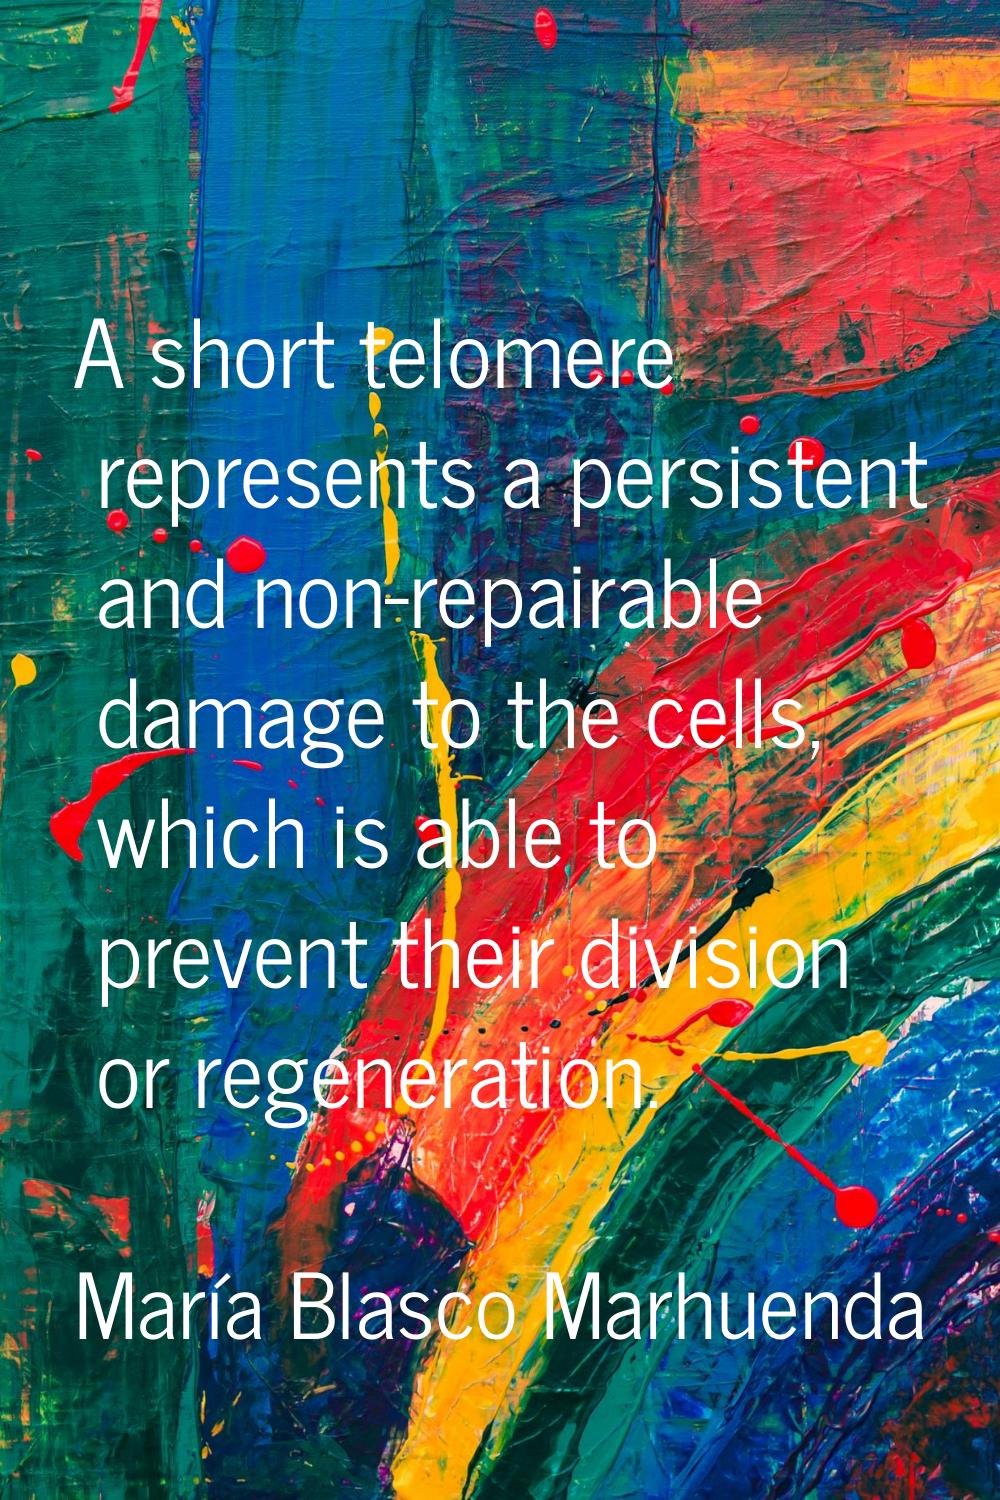 A short telomere represents a persistent and non-repairable damage to the cells, which is able to p